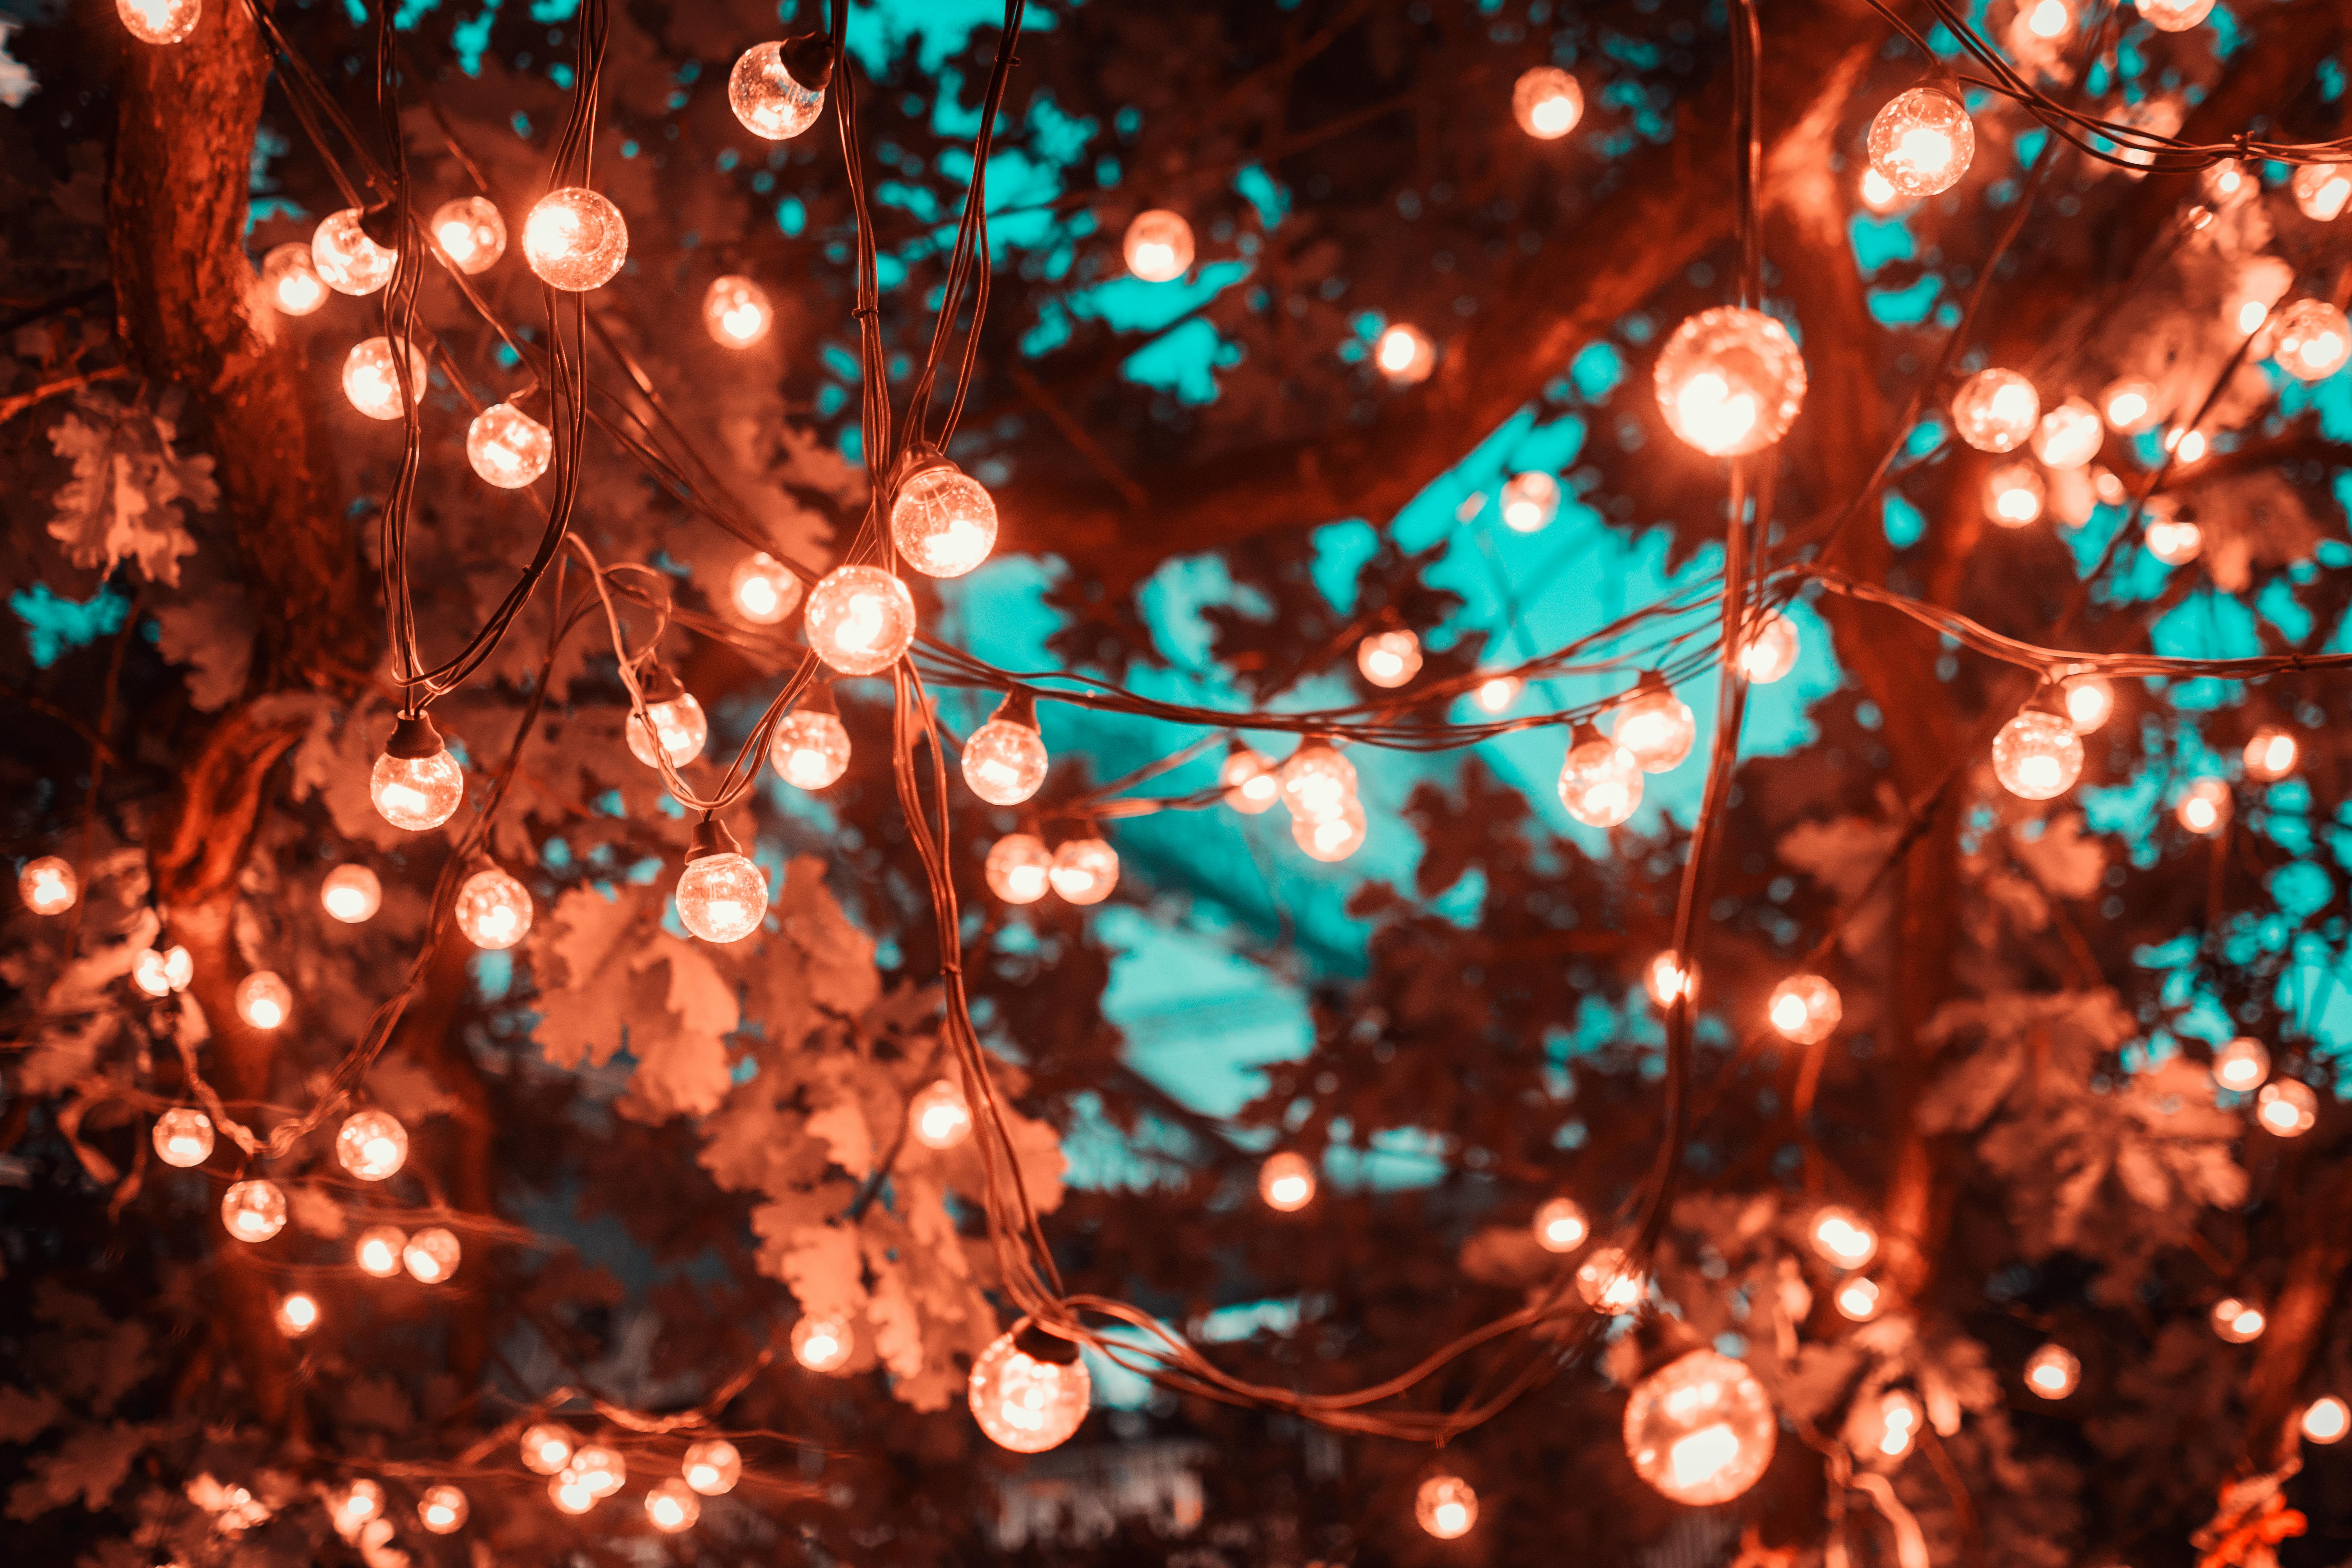 Lights Photos, Download The BEST Free Lights Stock Photos & HD Images